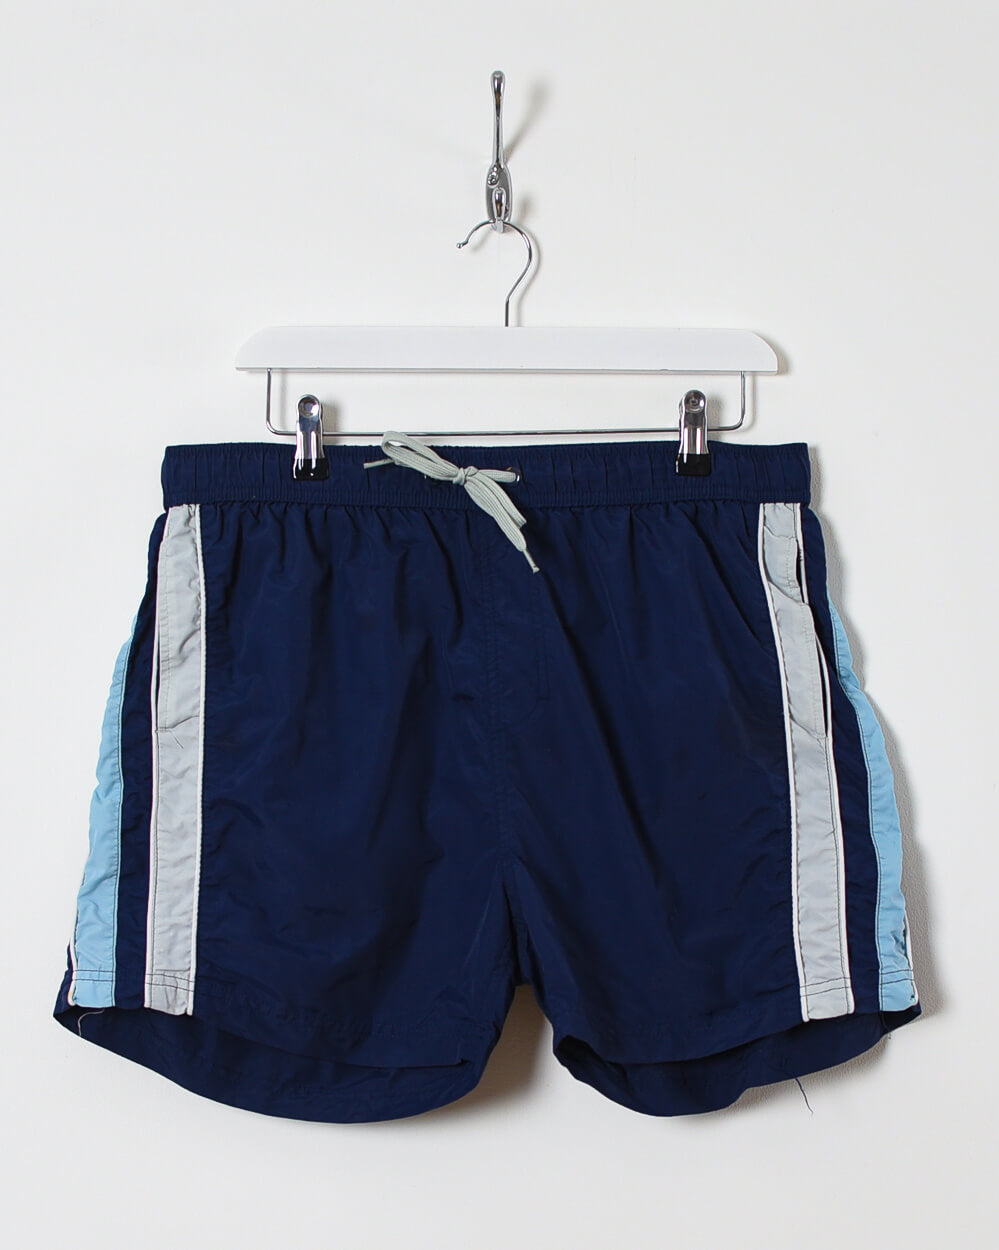 Best Company Swimwear Shorts - W32 - Domno Vintage 90s, 80s, 00s Retro and Vintage Clothing 